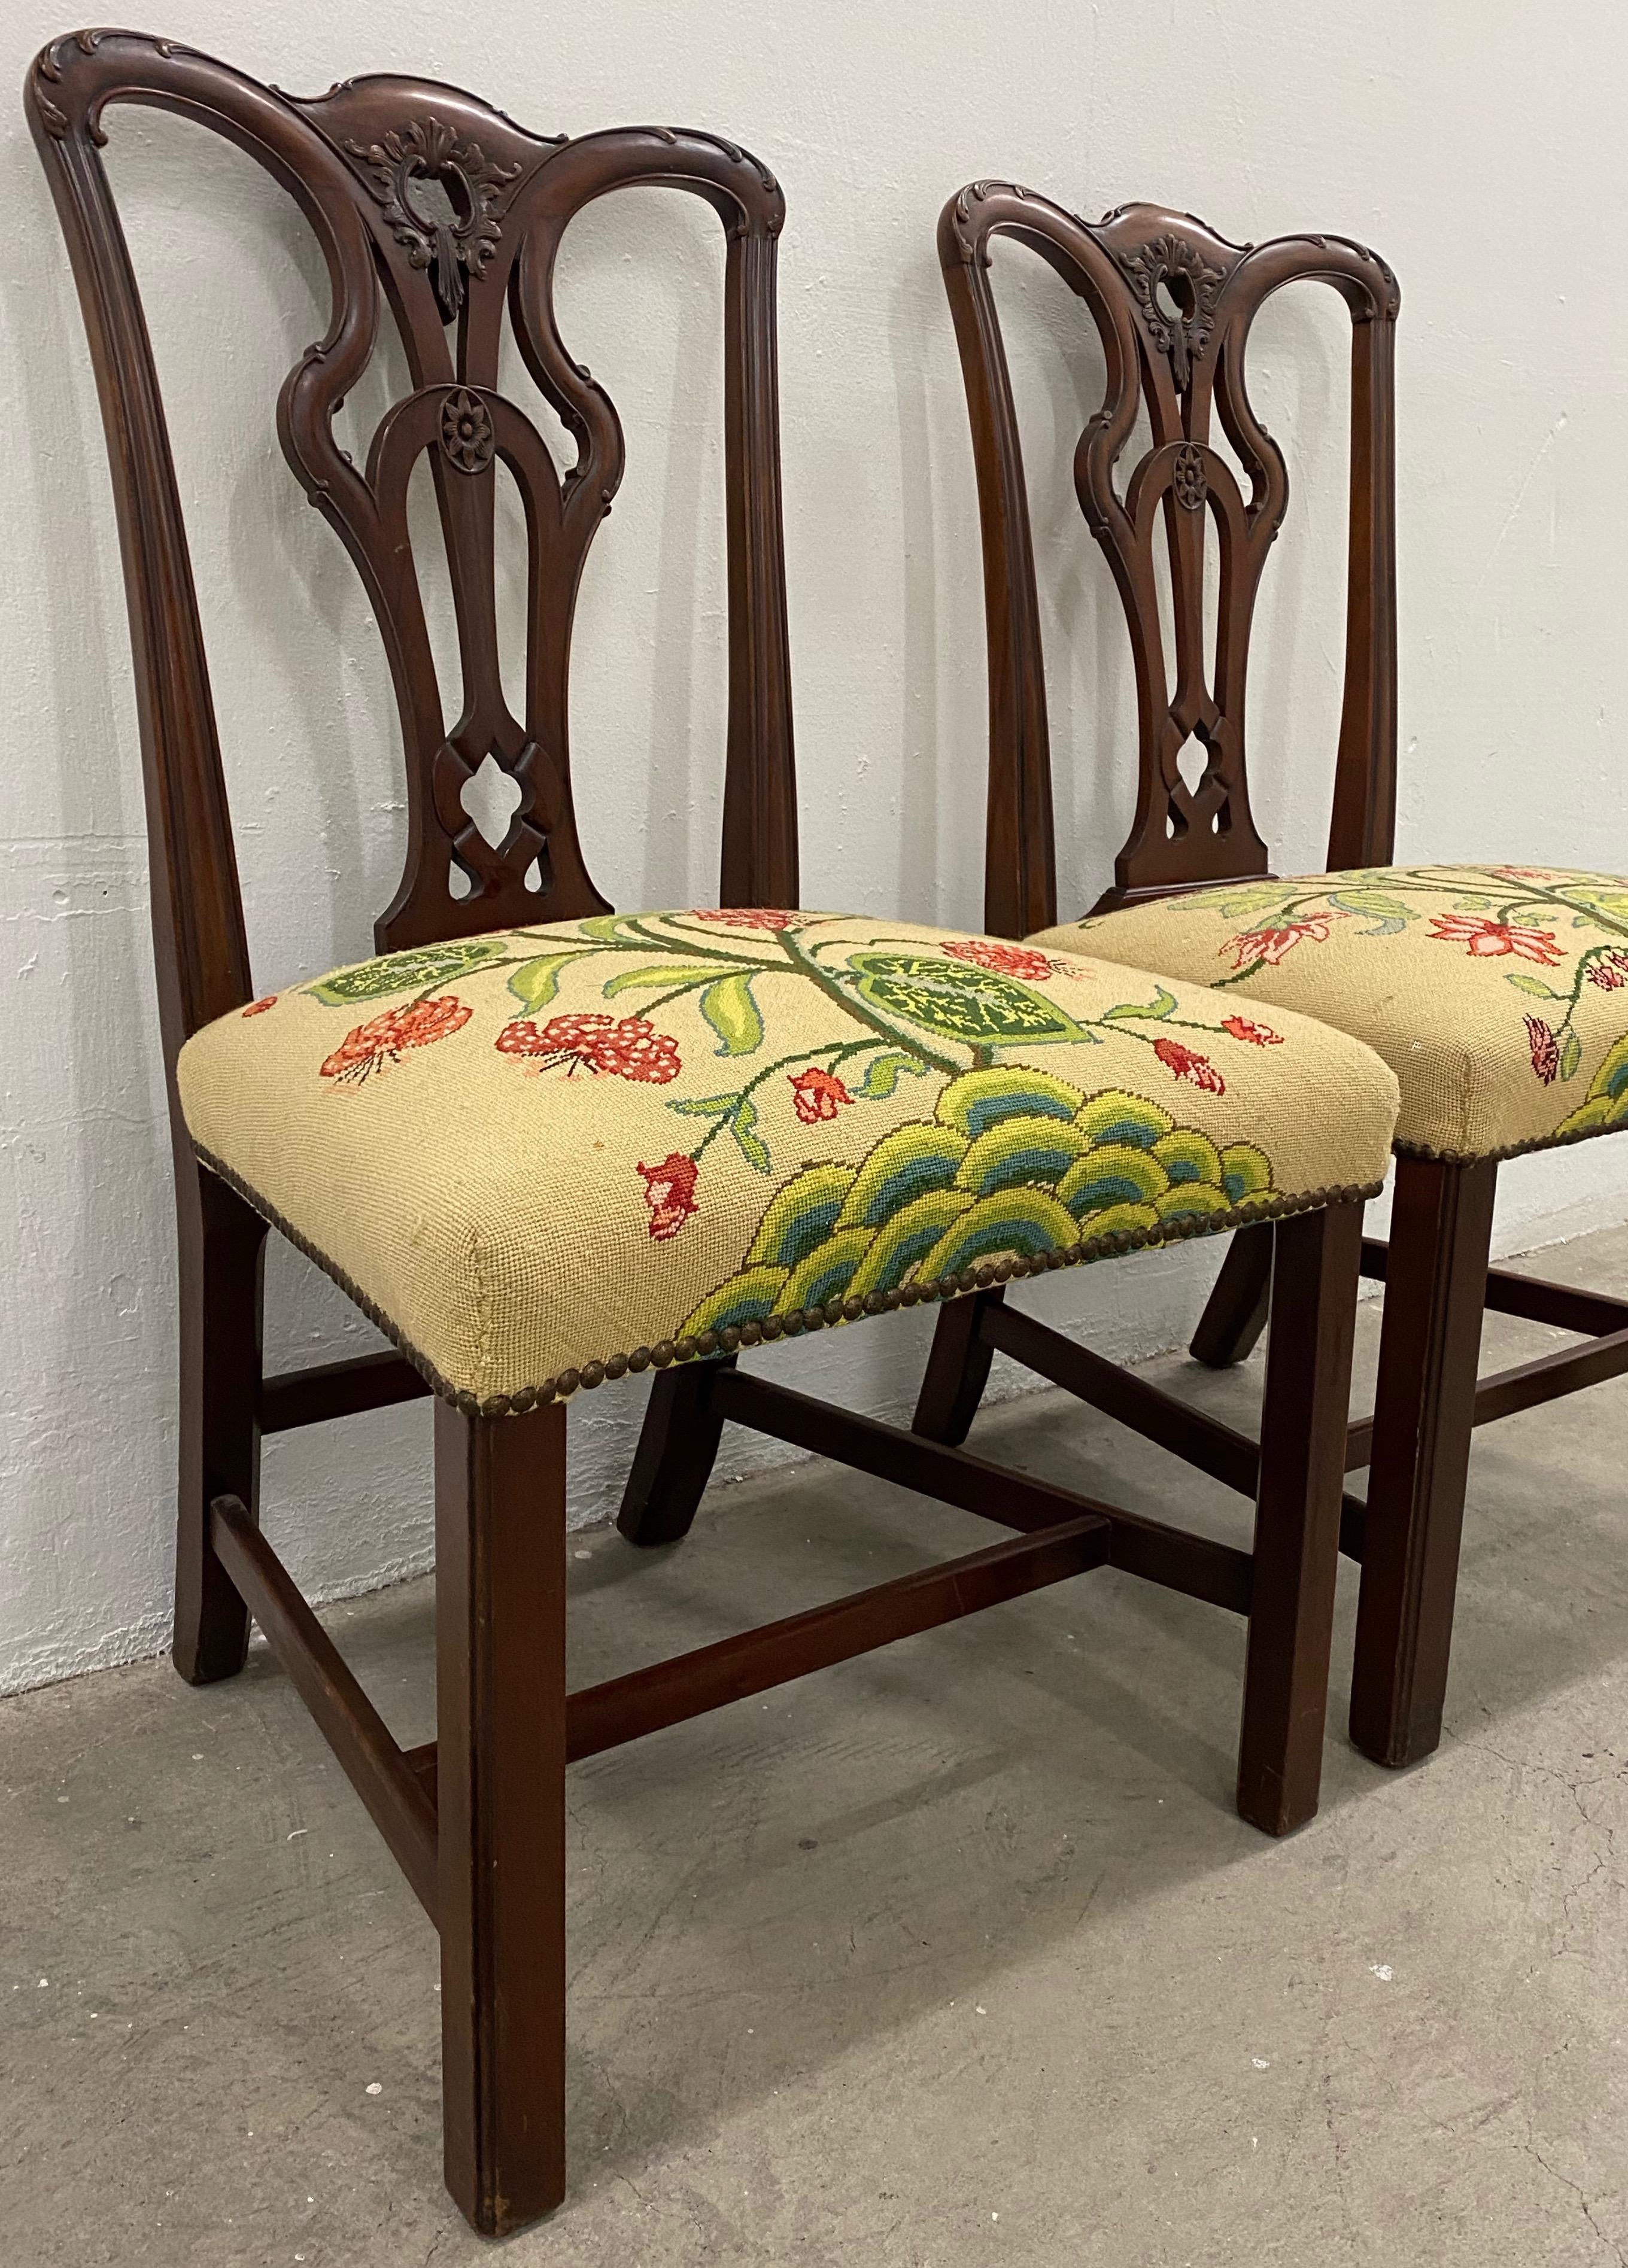 Pair of antique mahogany Chippendale style side chairs with needlepoint seats 19th century.

Beautifully carved mahogany side chairs. Each seat has a unique Art Deco floral design.

Dimensions 22